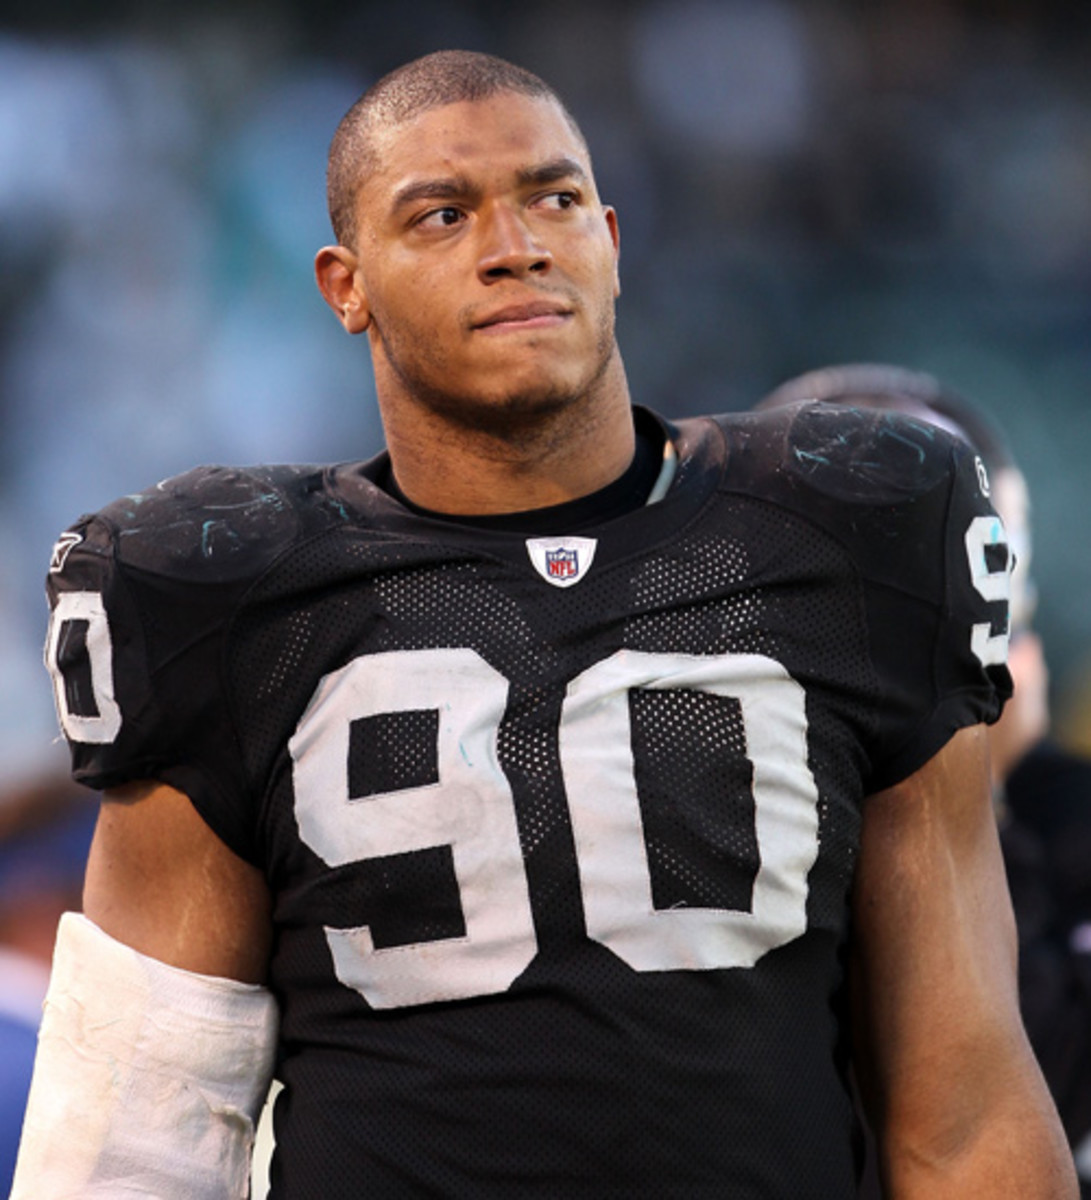 The Raiders' Desmond Bryant was arrested on Sunday on a criminal mischief charge. (Hannah Foslien/Getty Images)